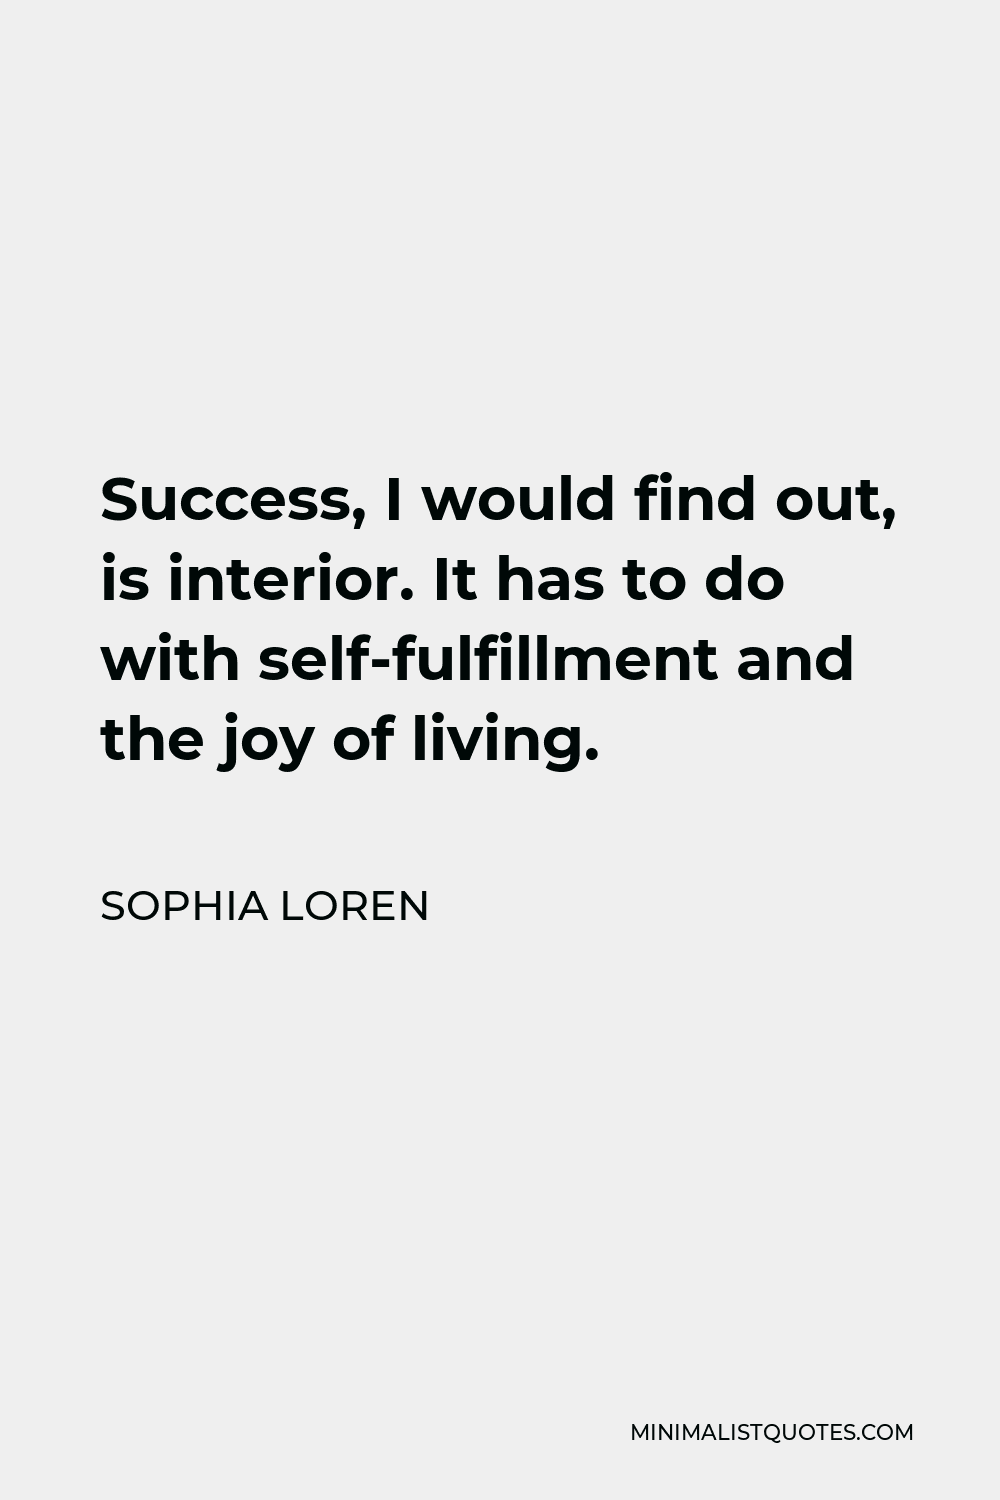 Sophia Loren Quote - Success, I would find out, is interior. It has to do with self-fulfillment and the joy of living.